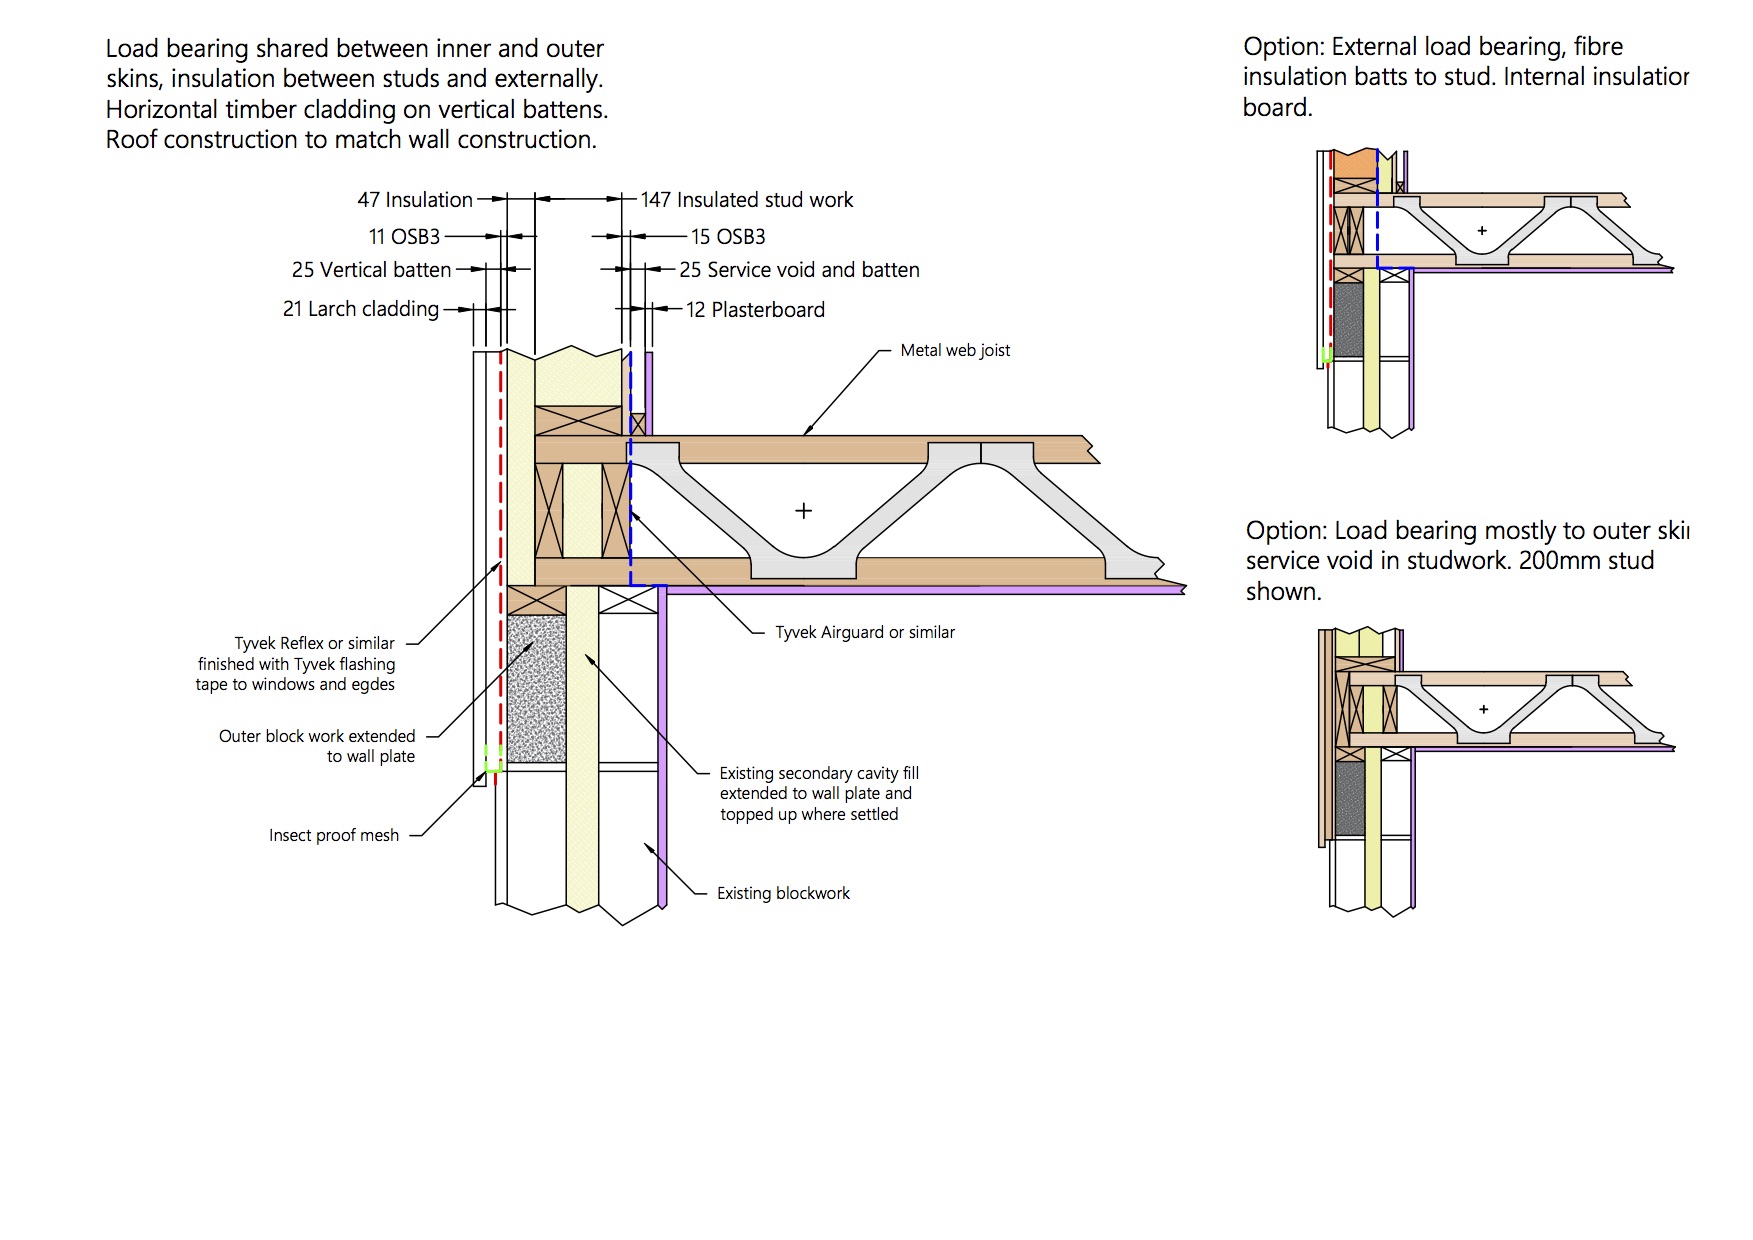 Building A Timber Frame First Floor Over A Cavity Wall Timber Frame Buildhub Org Uk